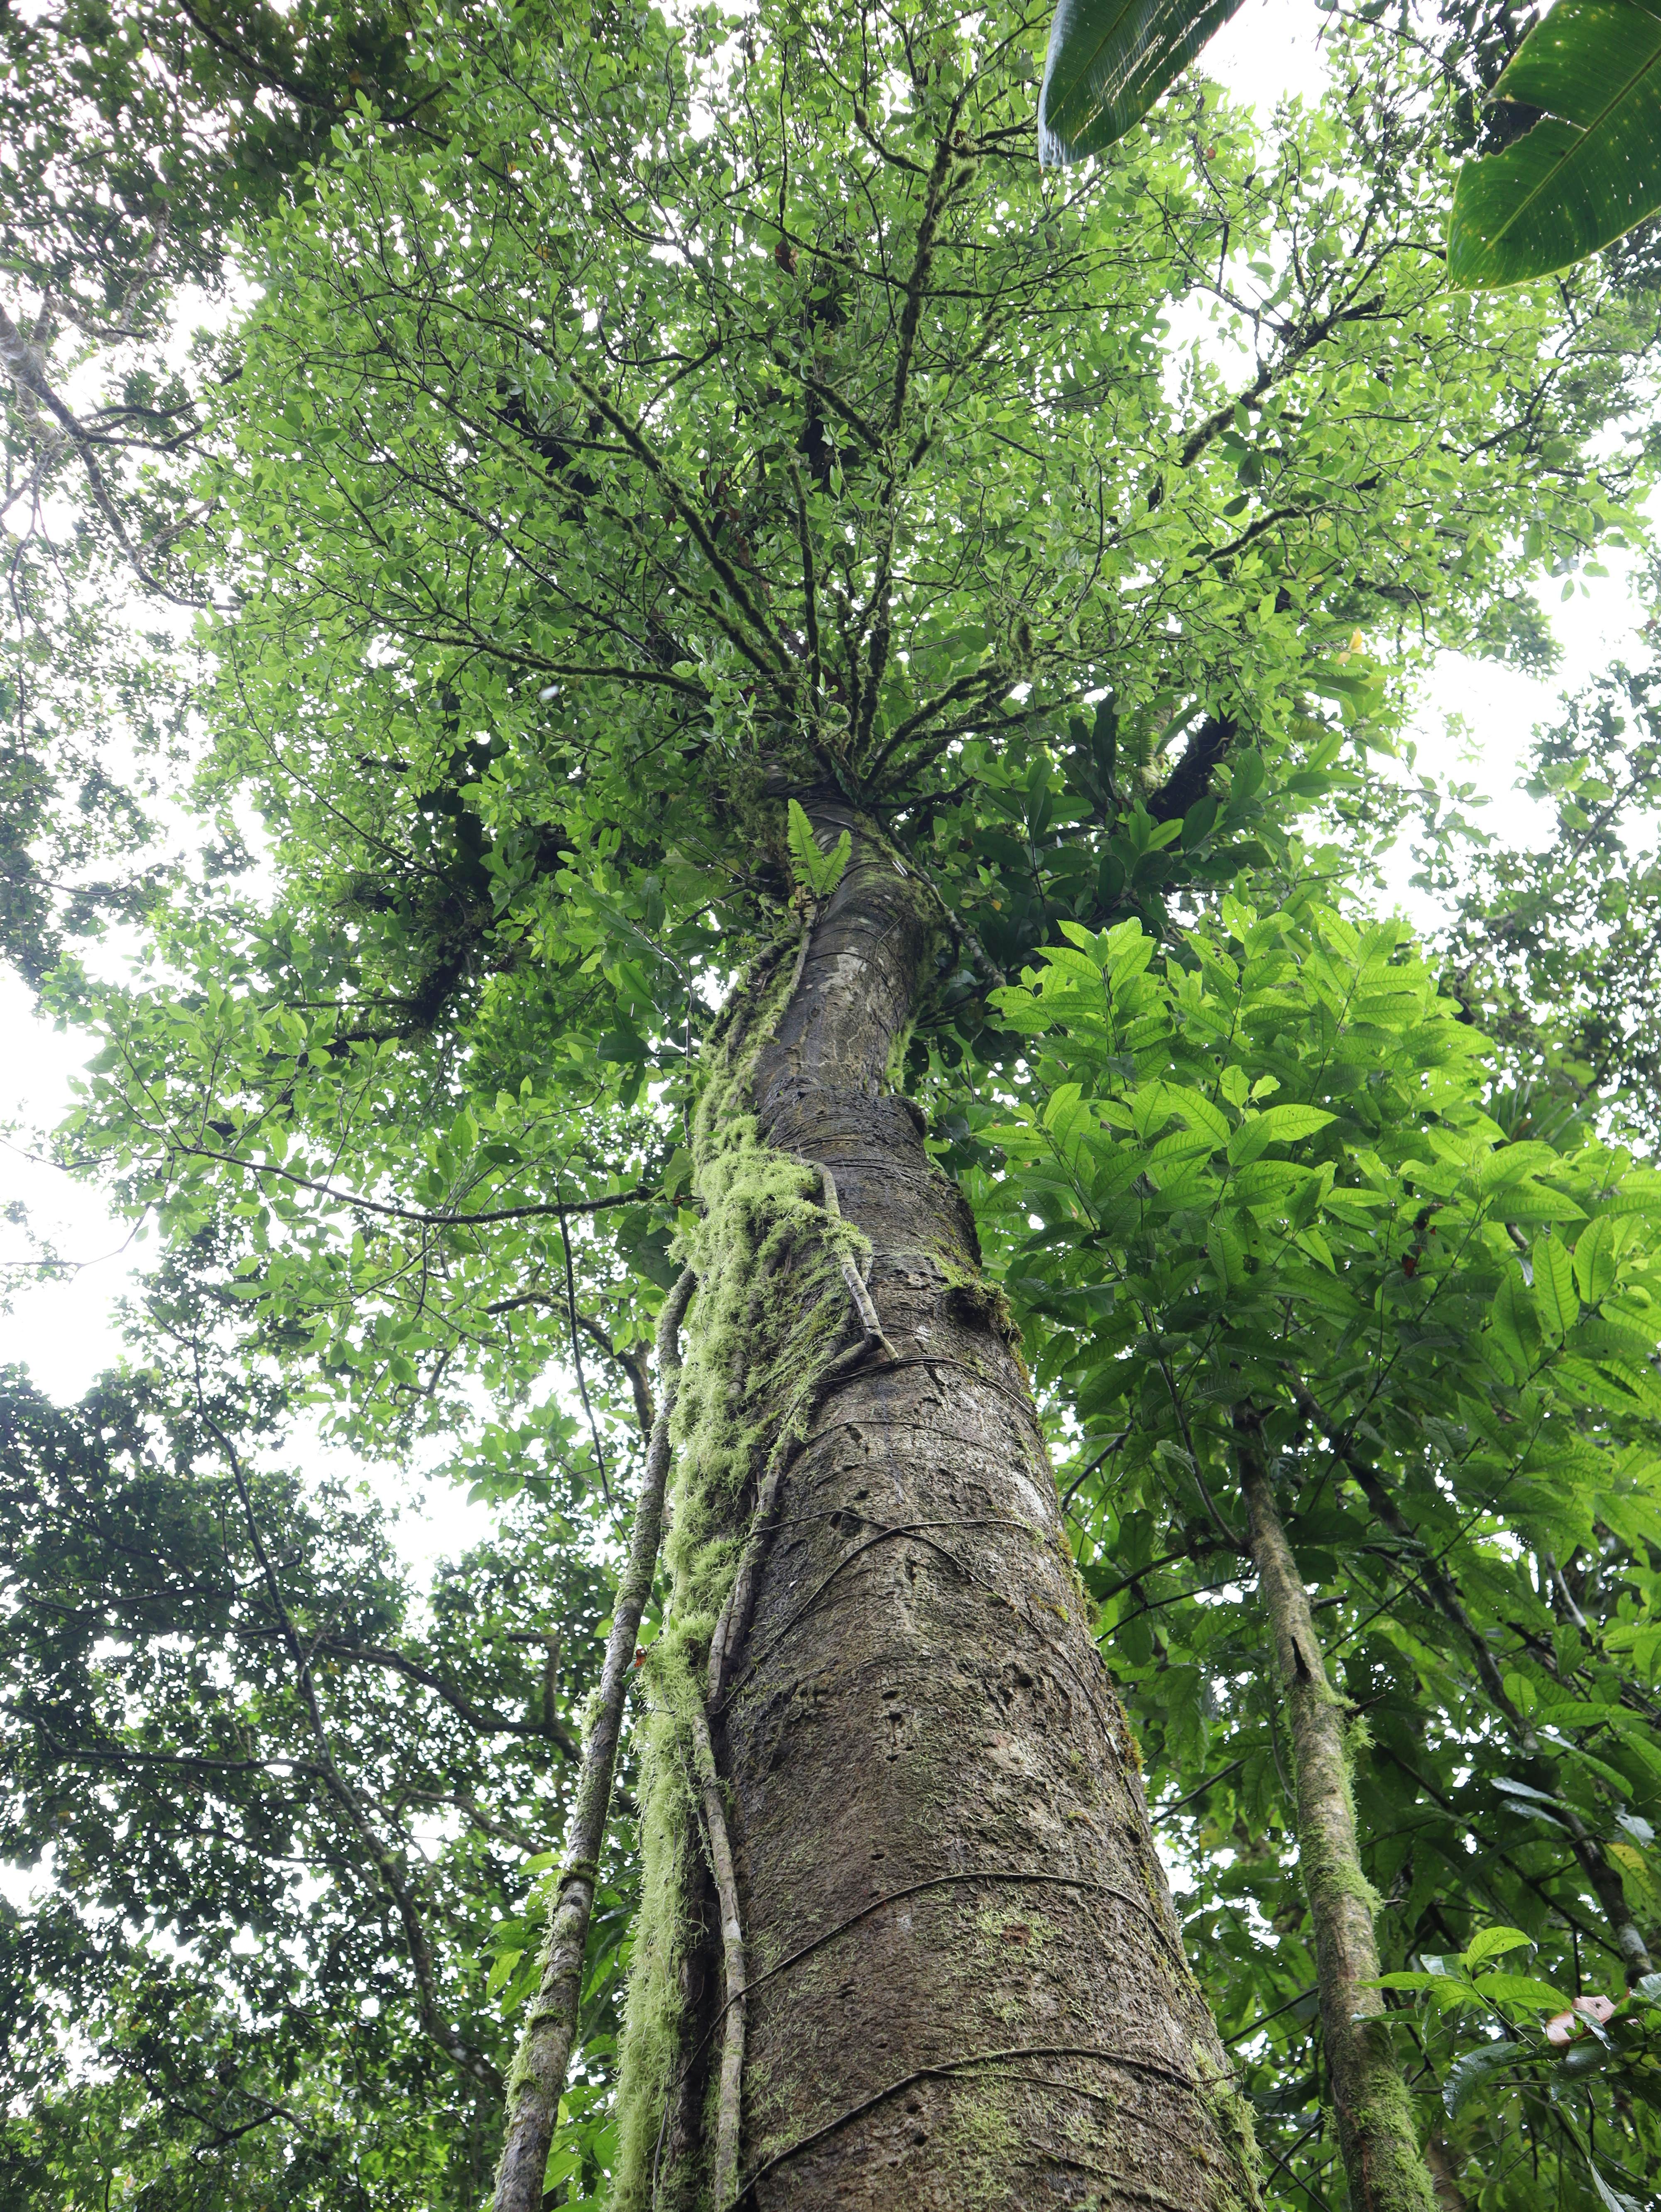 Trees in the tropical forest. They help offset the carbon footprint by producing oxygen